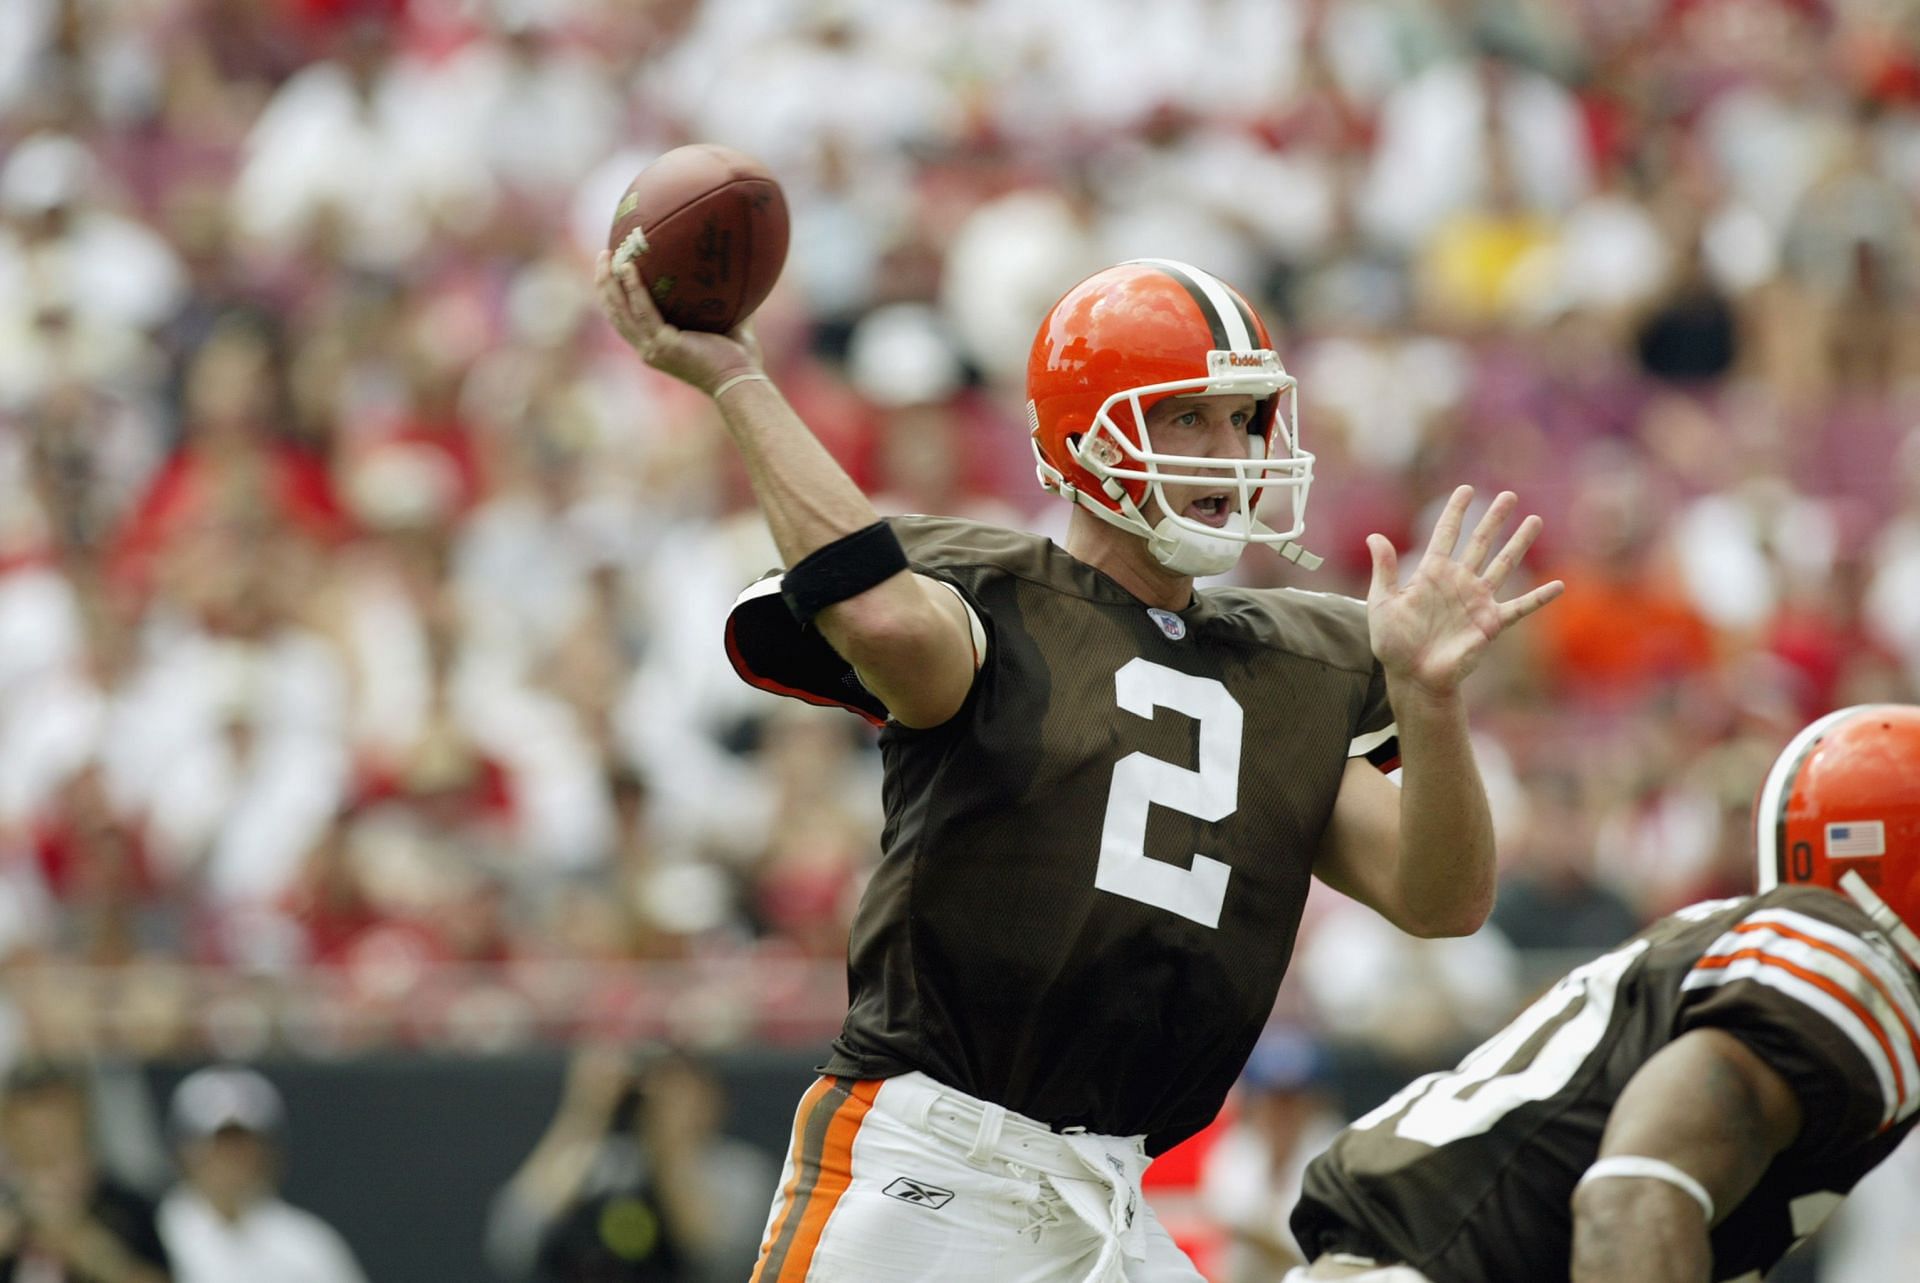 Former Cleveland Browns quarterback Tim Couch